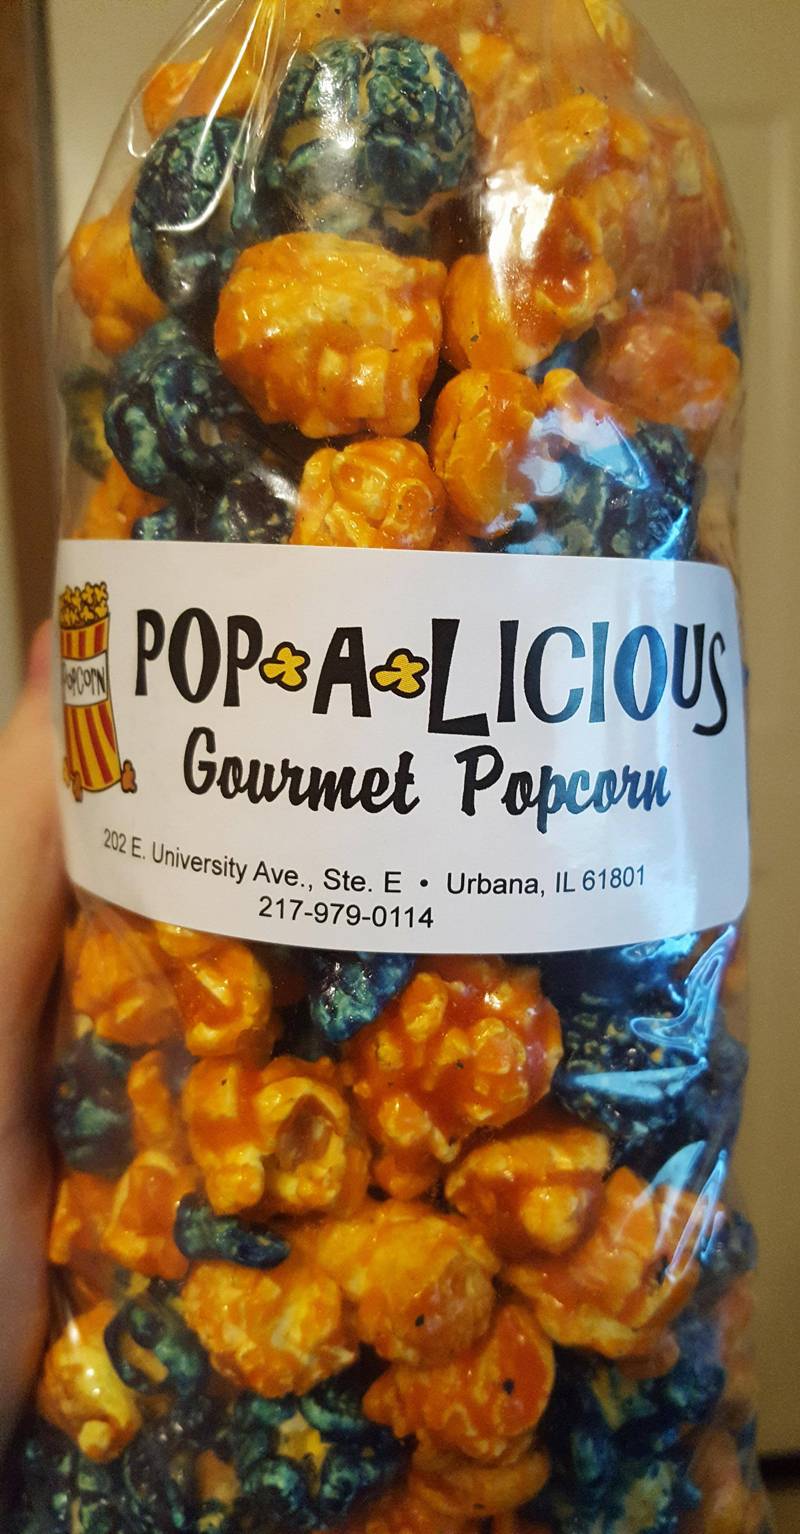 Pop-a-licious offers sweet and salty snacks